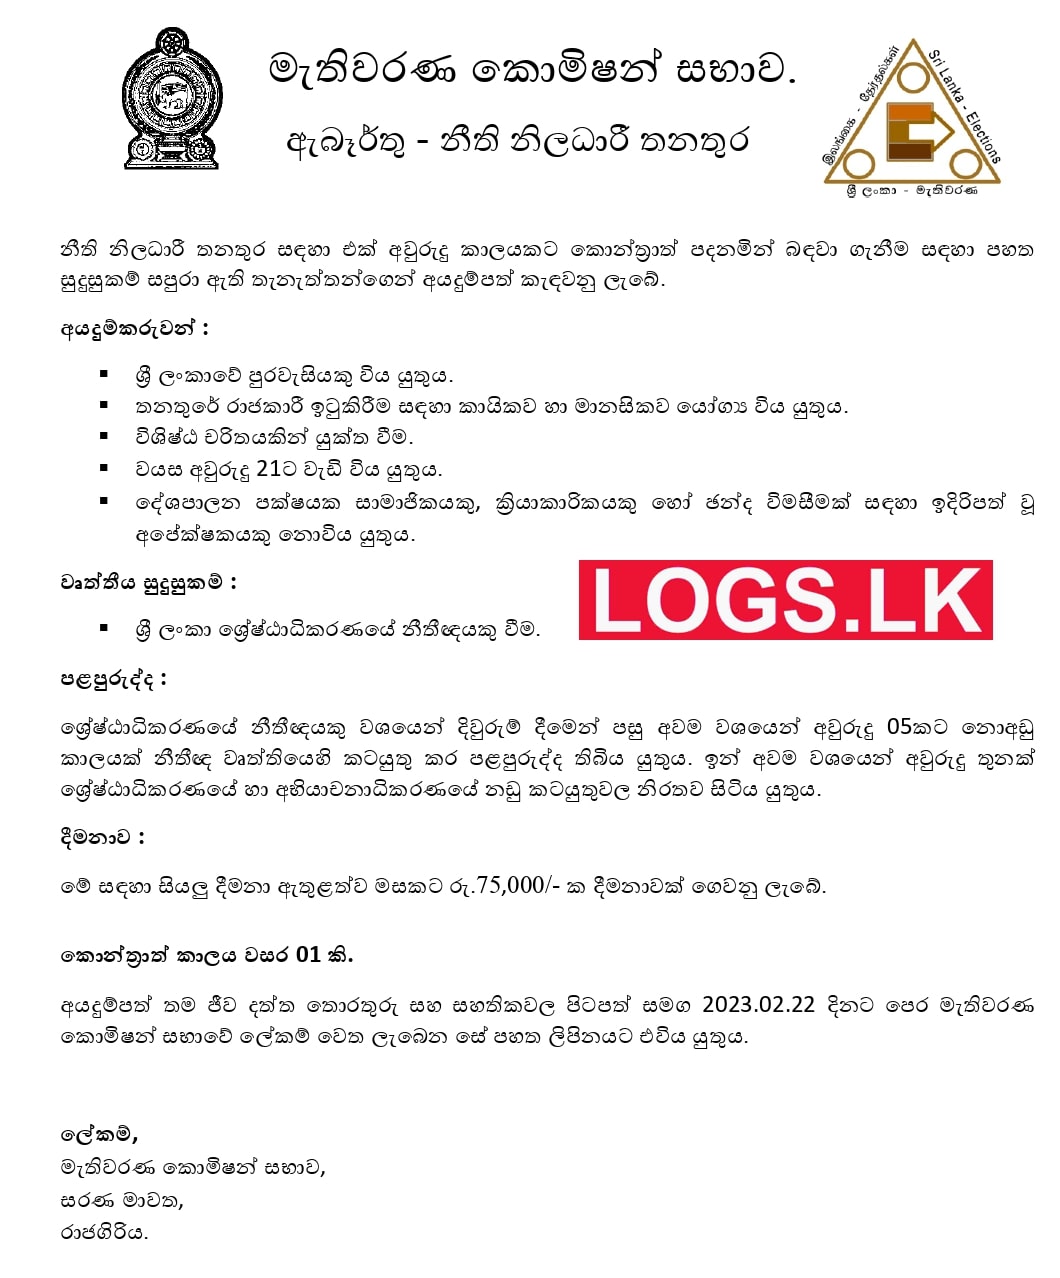 Legal Officer - Election Commission of Sri Lanka Vacancies 2023 Application Form Download